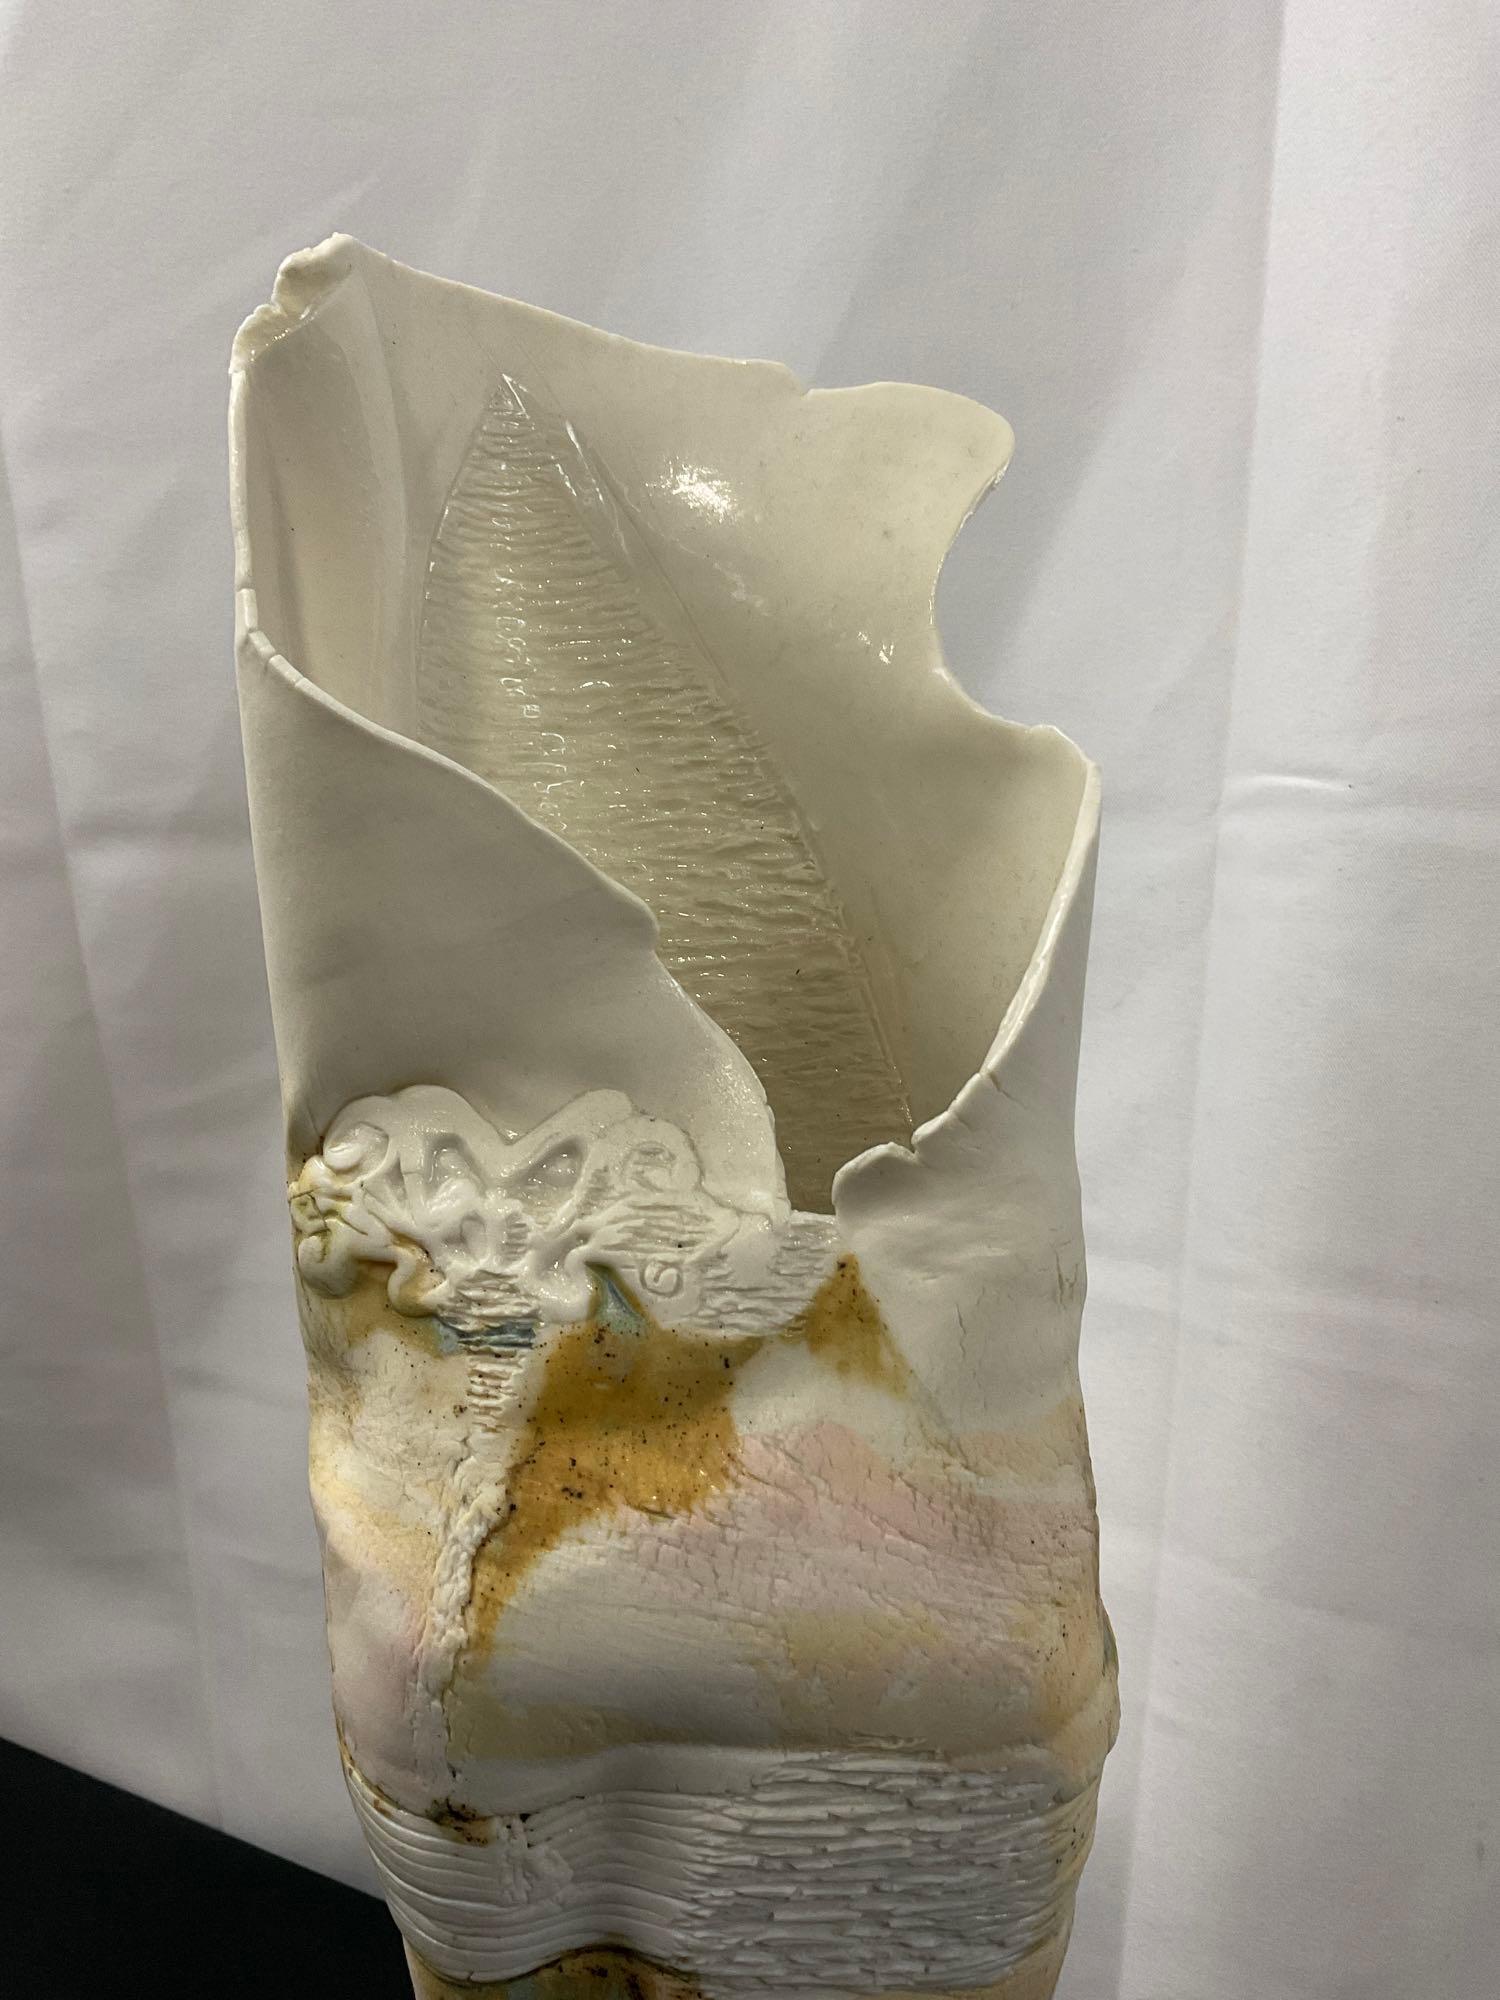 Unique White Porcelain Vase from Touchstone Gallery, Yachats, OR